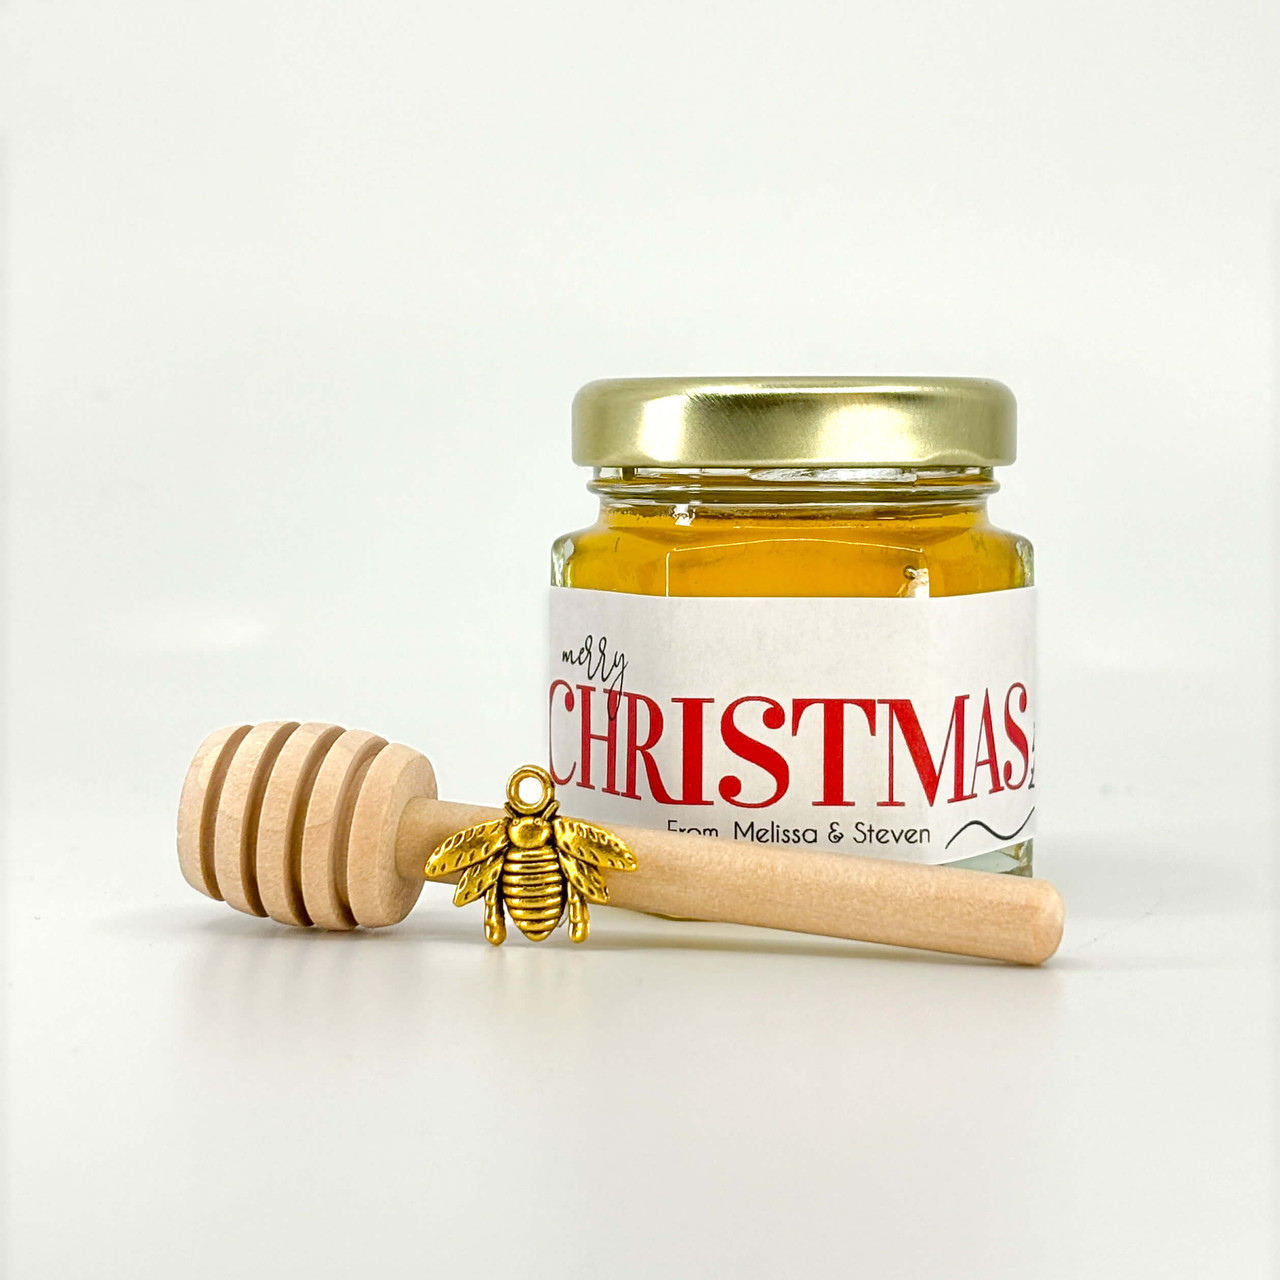 Merry Christmas honey jar with gold charm and dipper